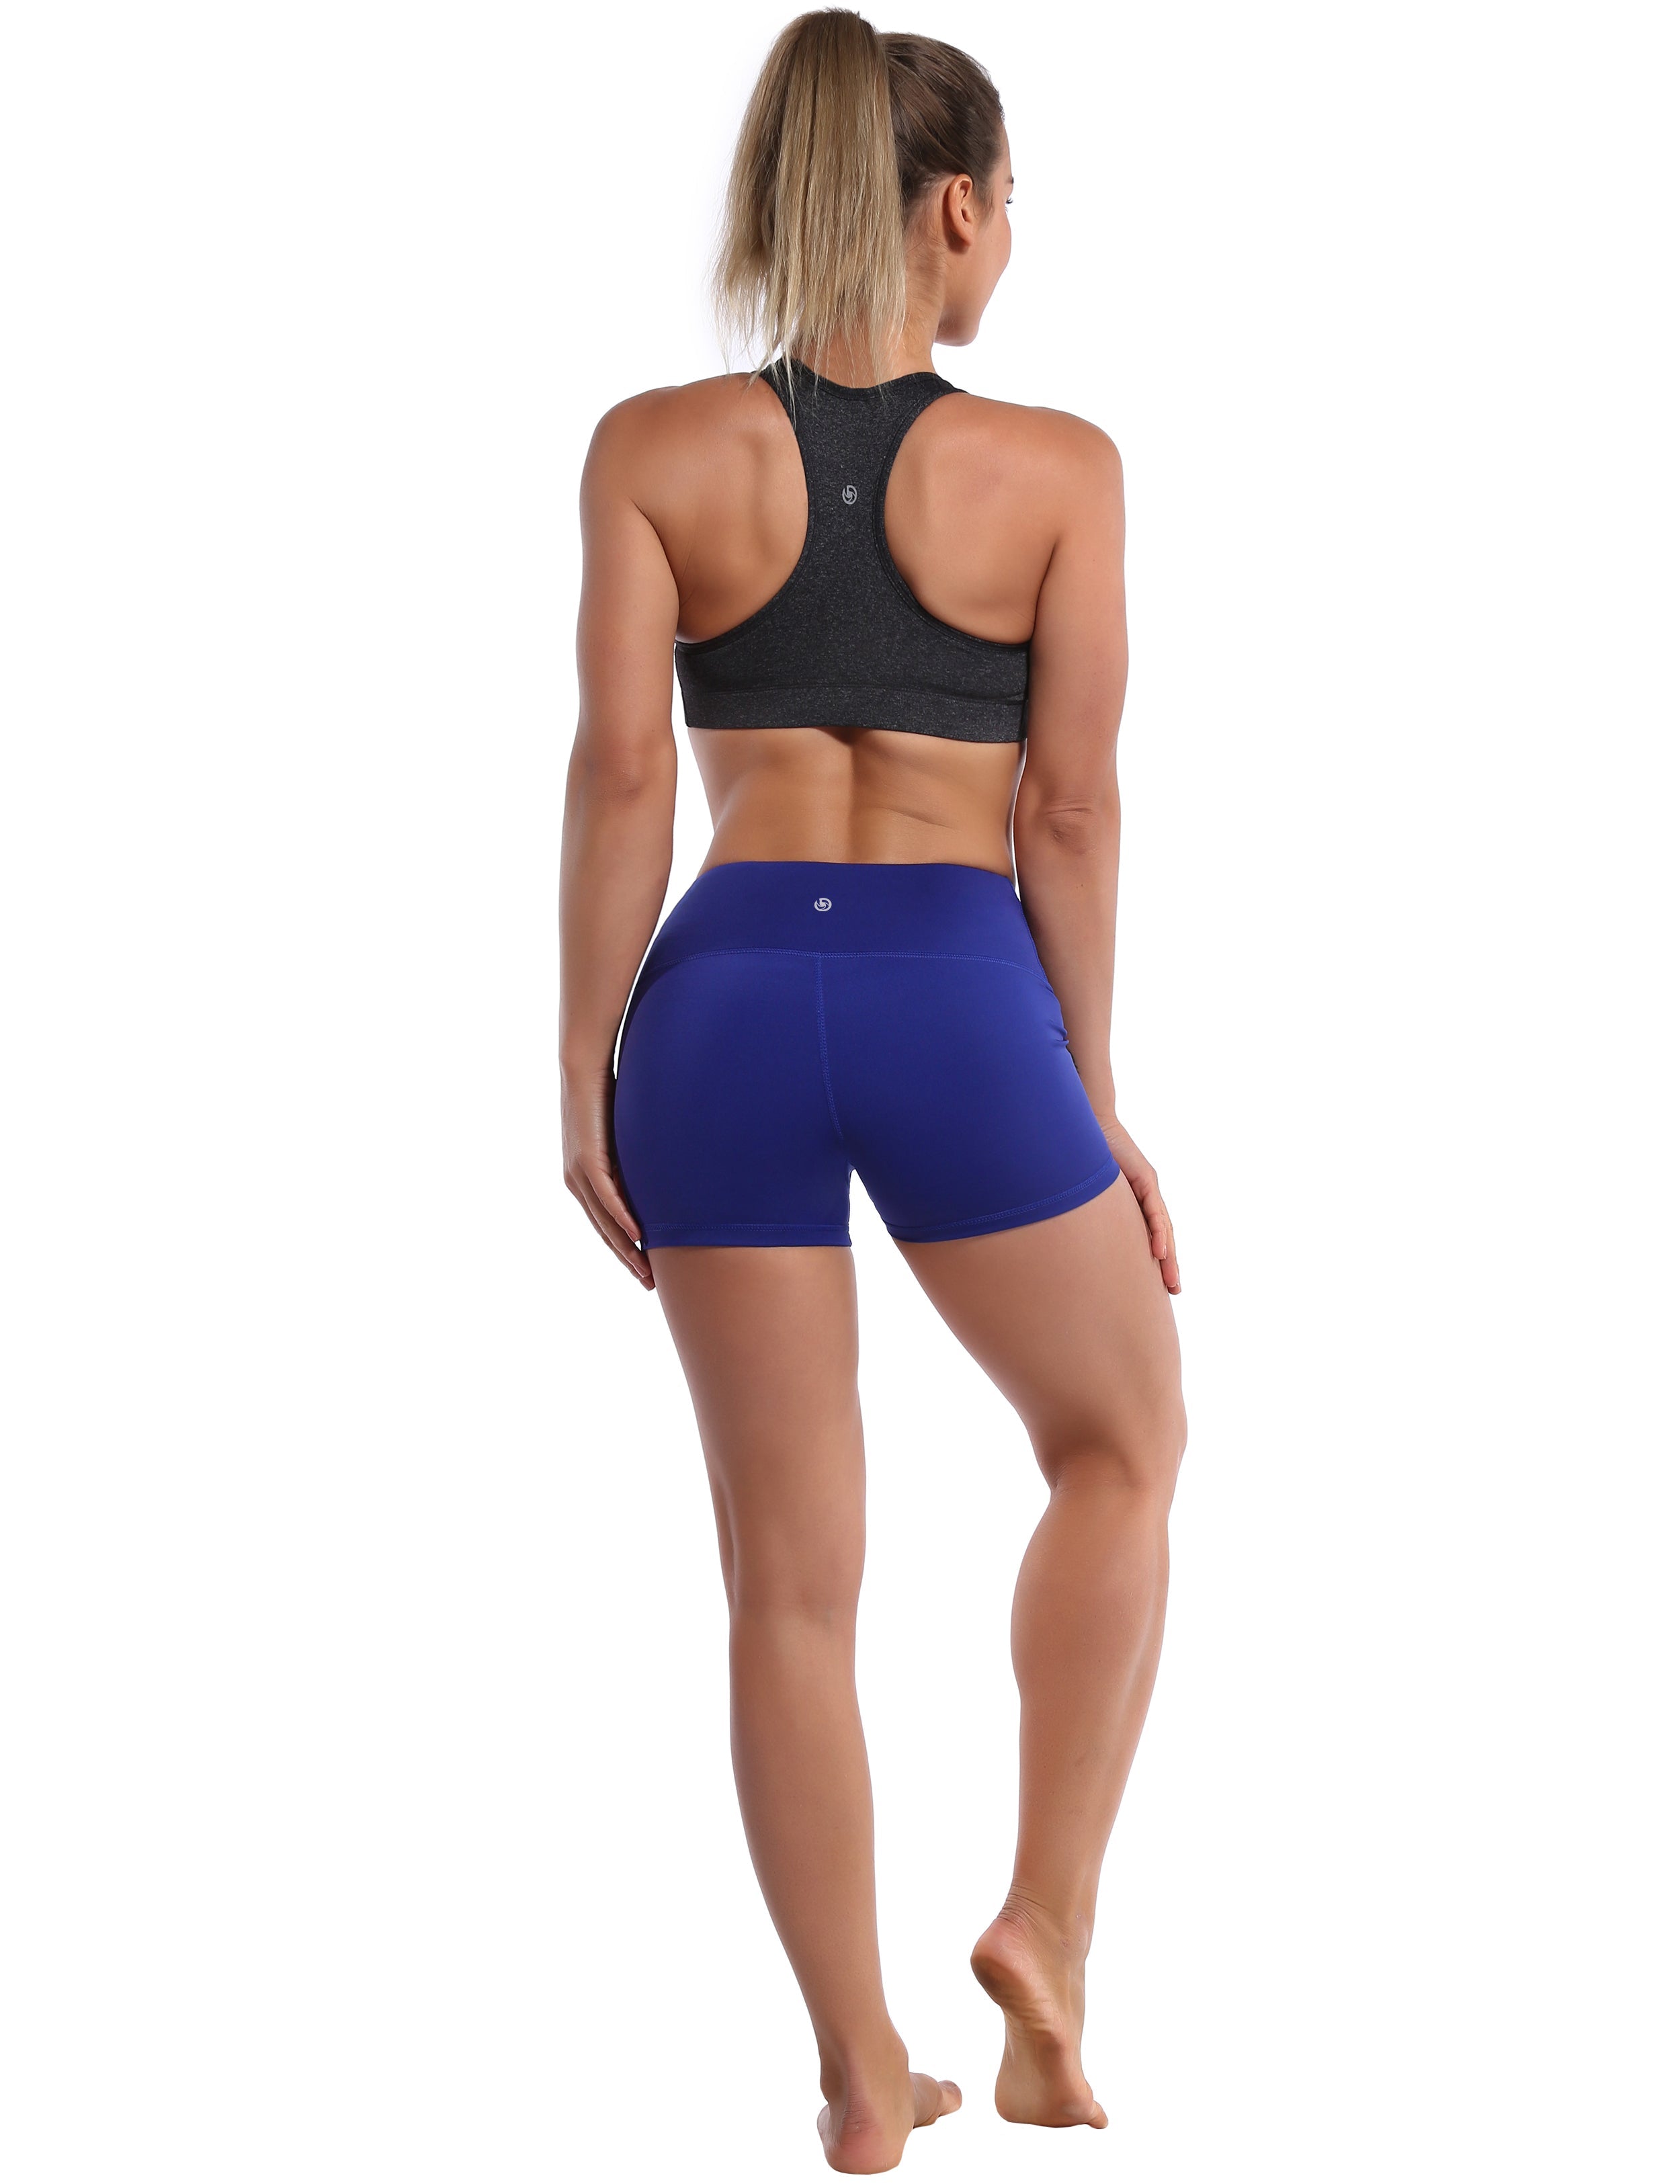 2.5" Pilates Shorts navy Softest-ever fabric High elasticity High density 4-way stretch Fabric doesn't attract lint easily No see-through Moisture-wicking Machine wash 75% Nylon, 25% Spandex